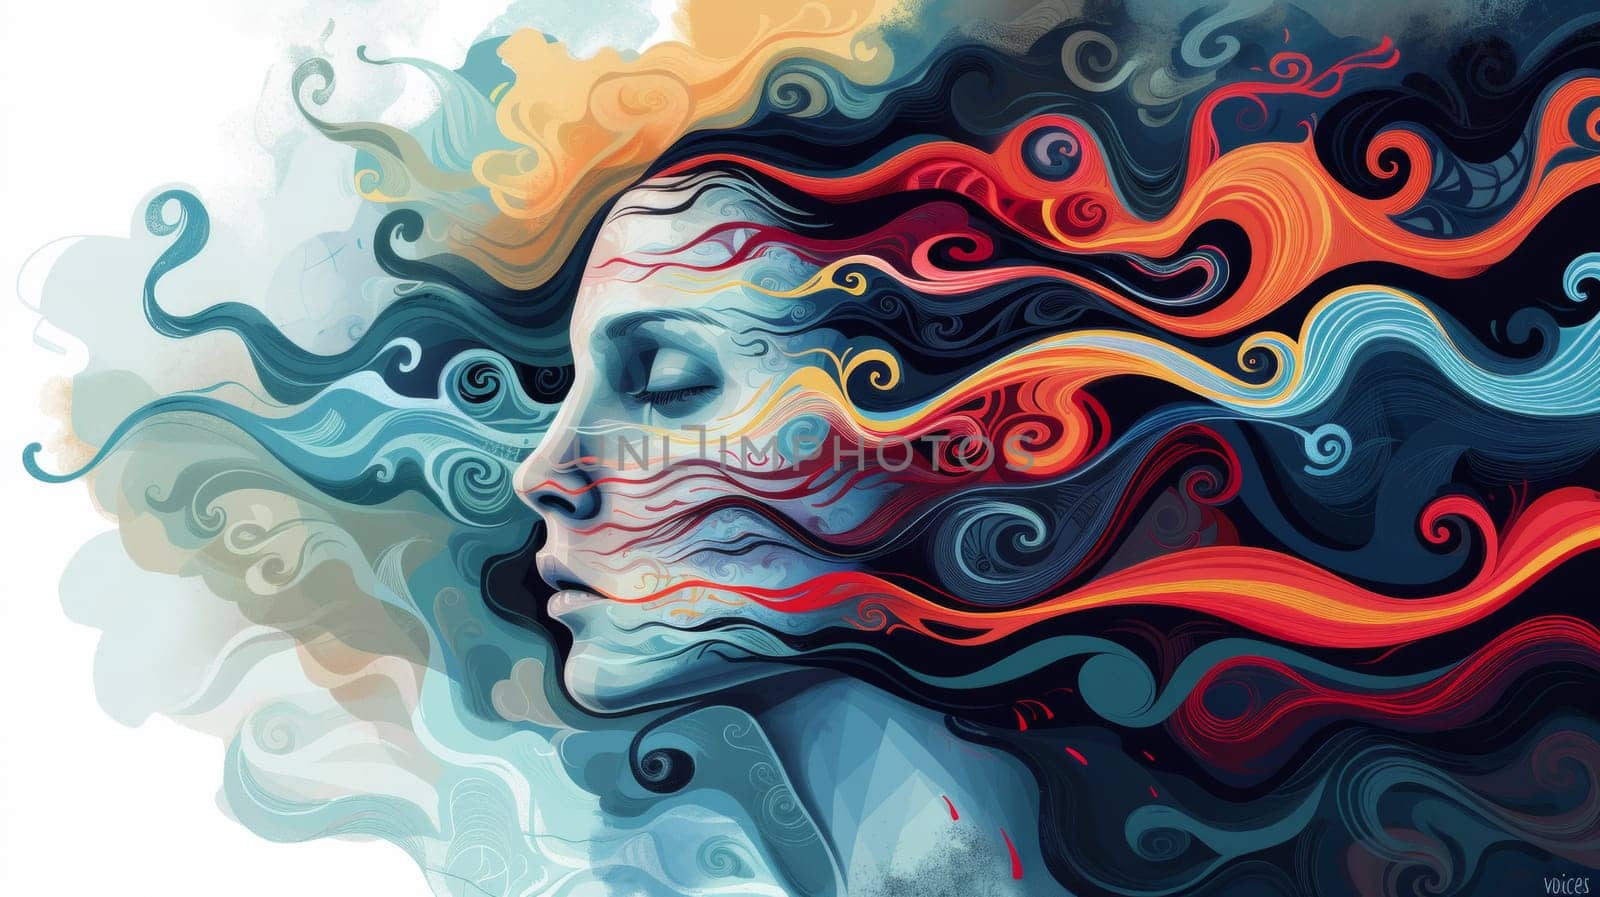 A woman with flowing hair and colorful swirls in her face